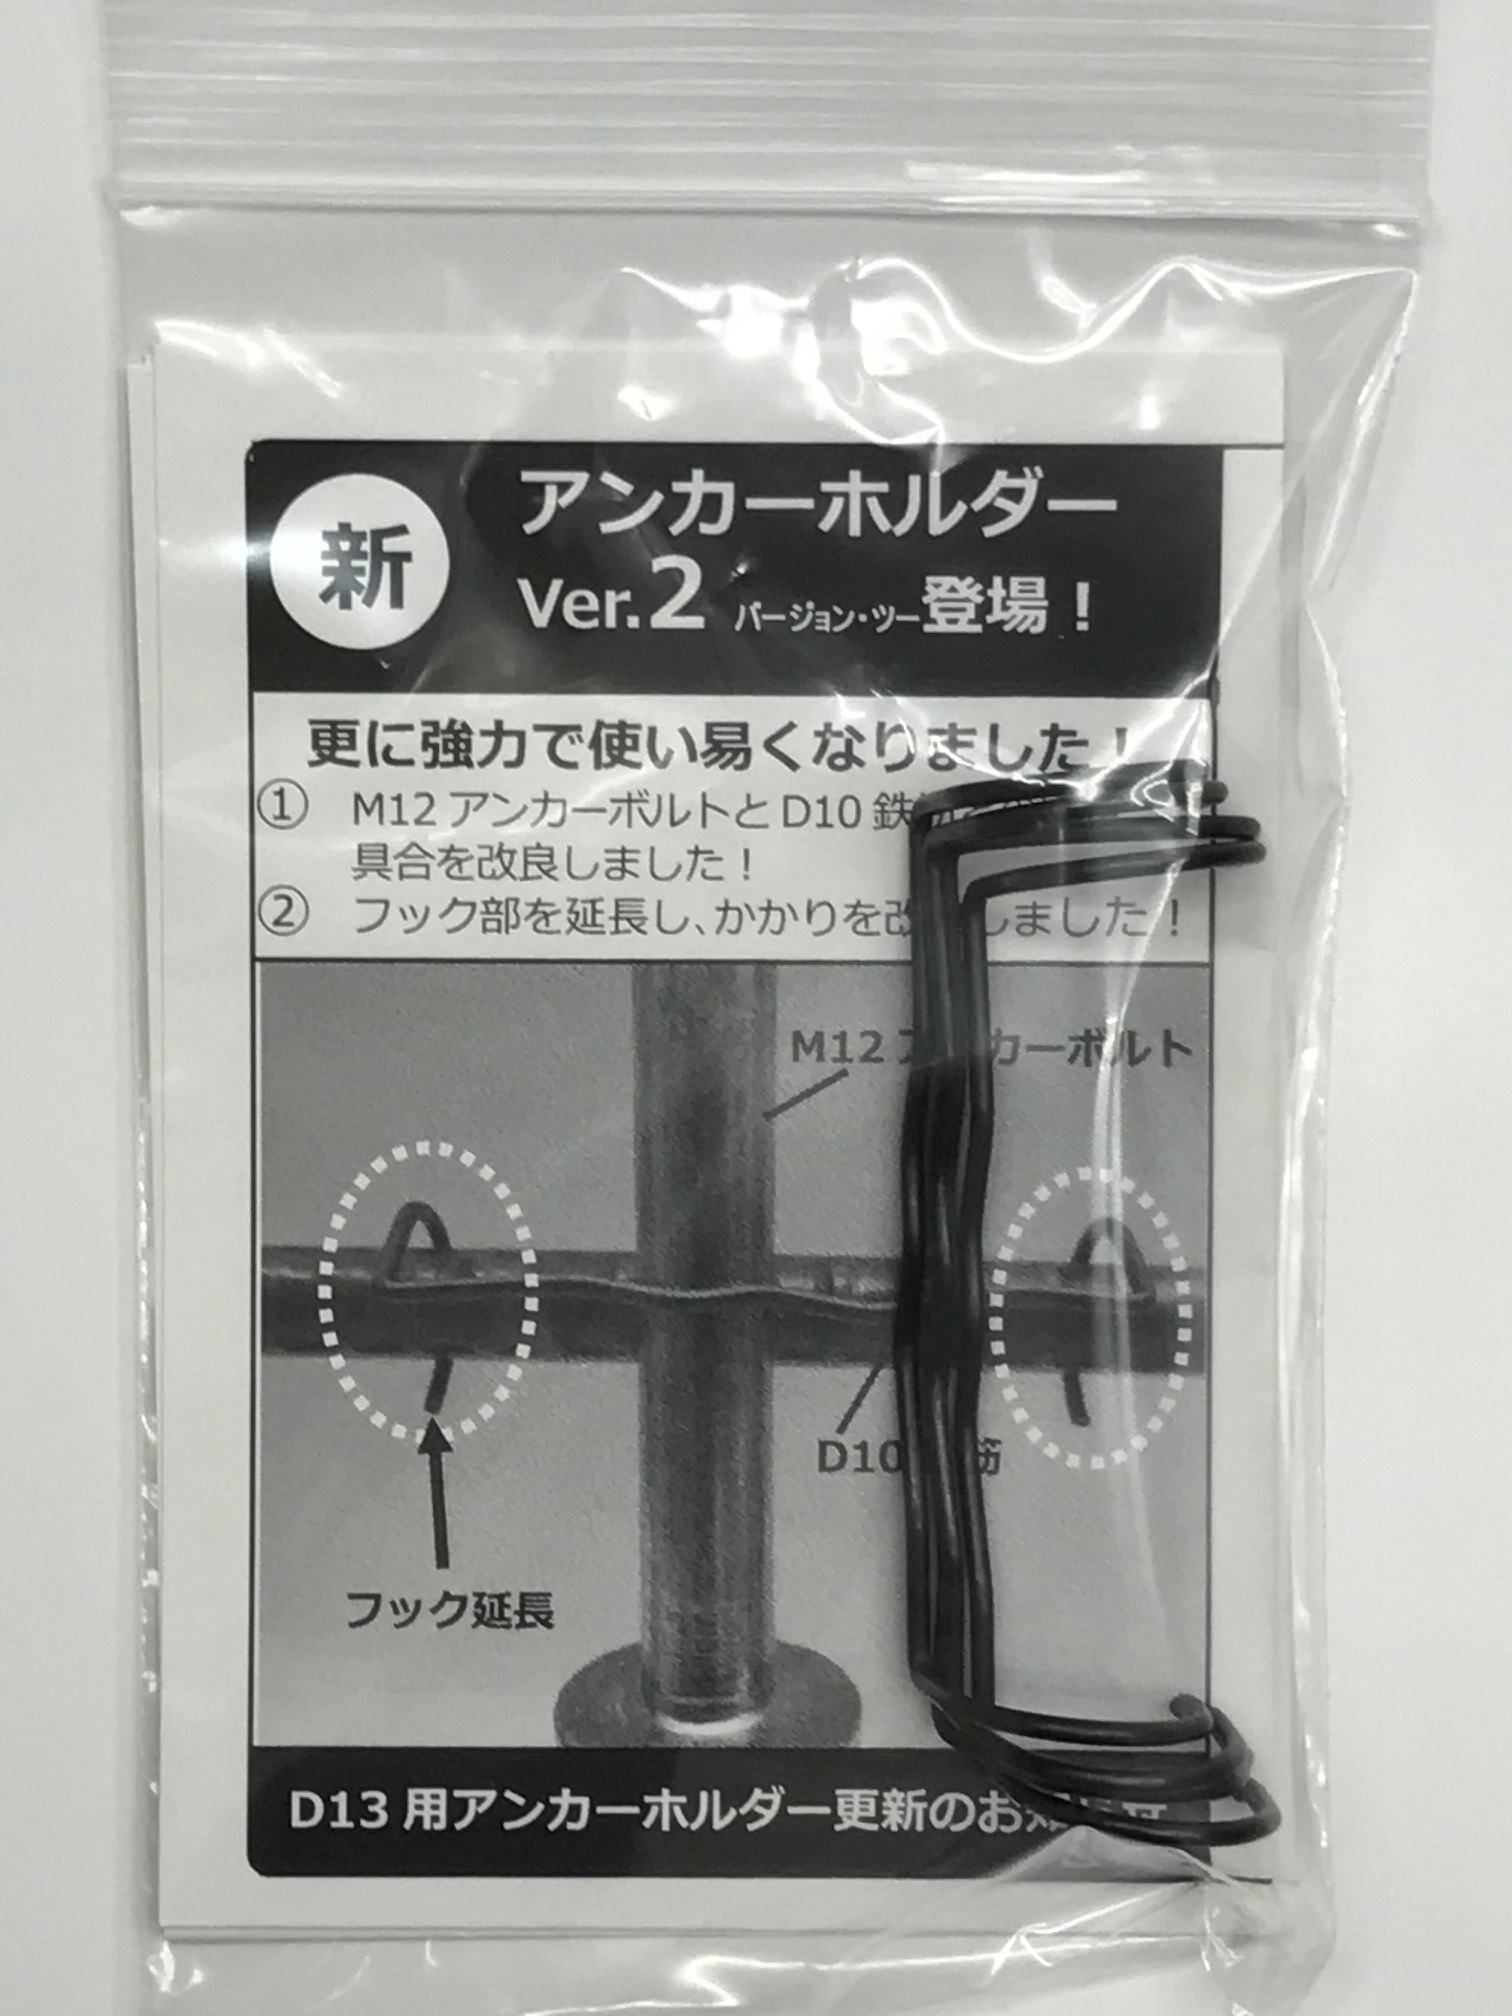 fischer フィッシャー ボルトアンカー FBN2 16 160 (10本入) 45569